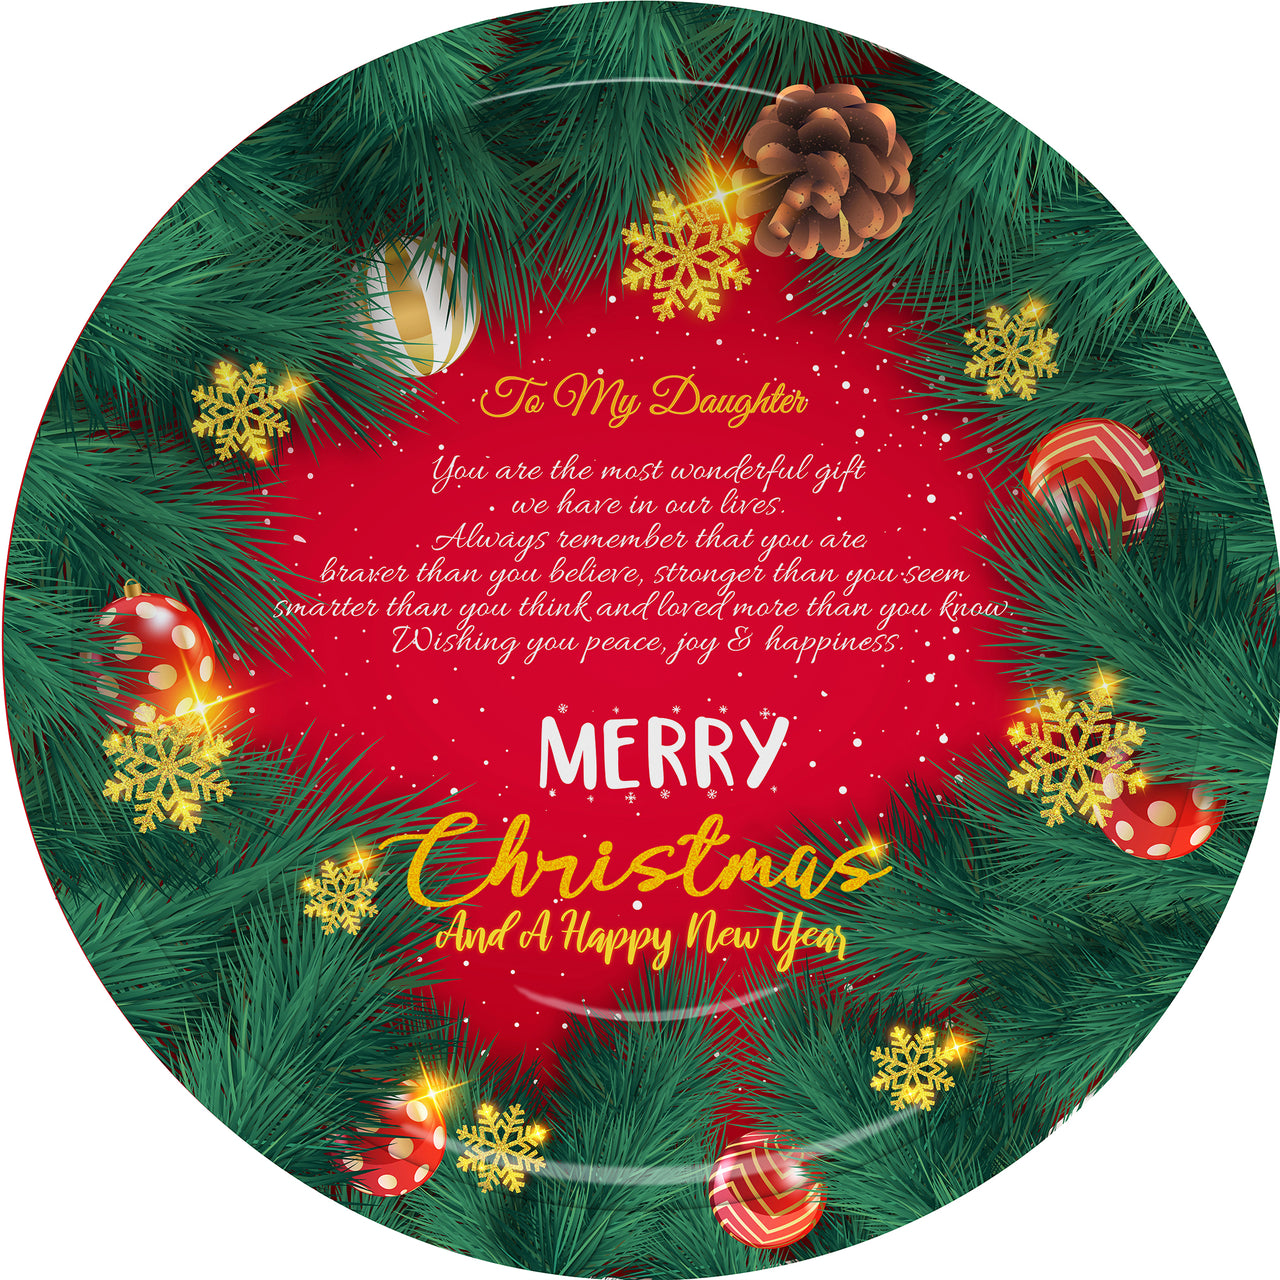 Christmas Plate - You are the most wonderful gift we have in our lives